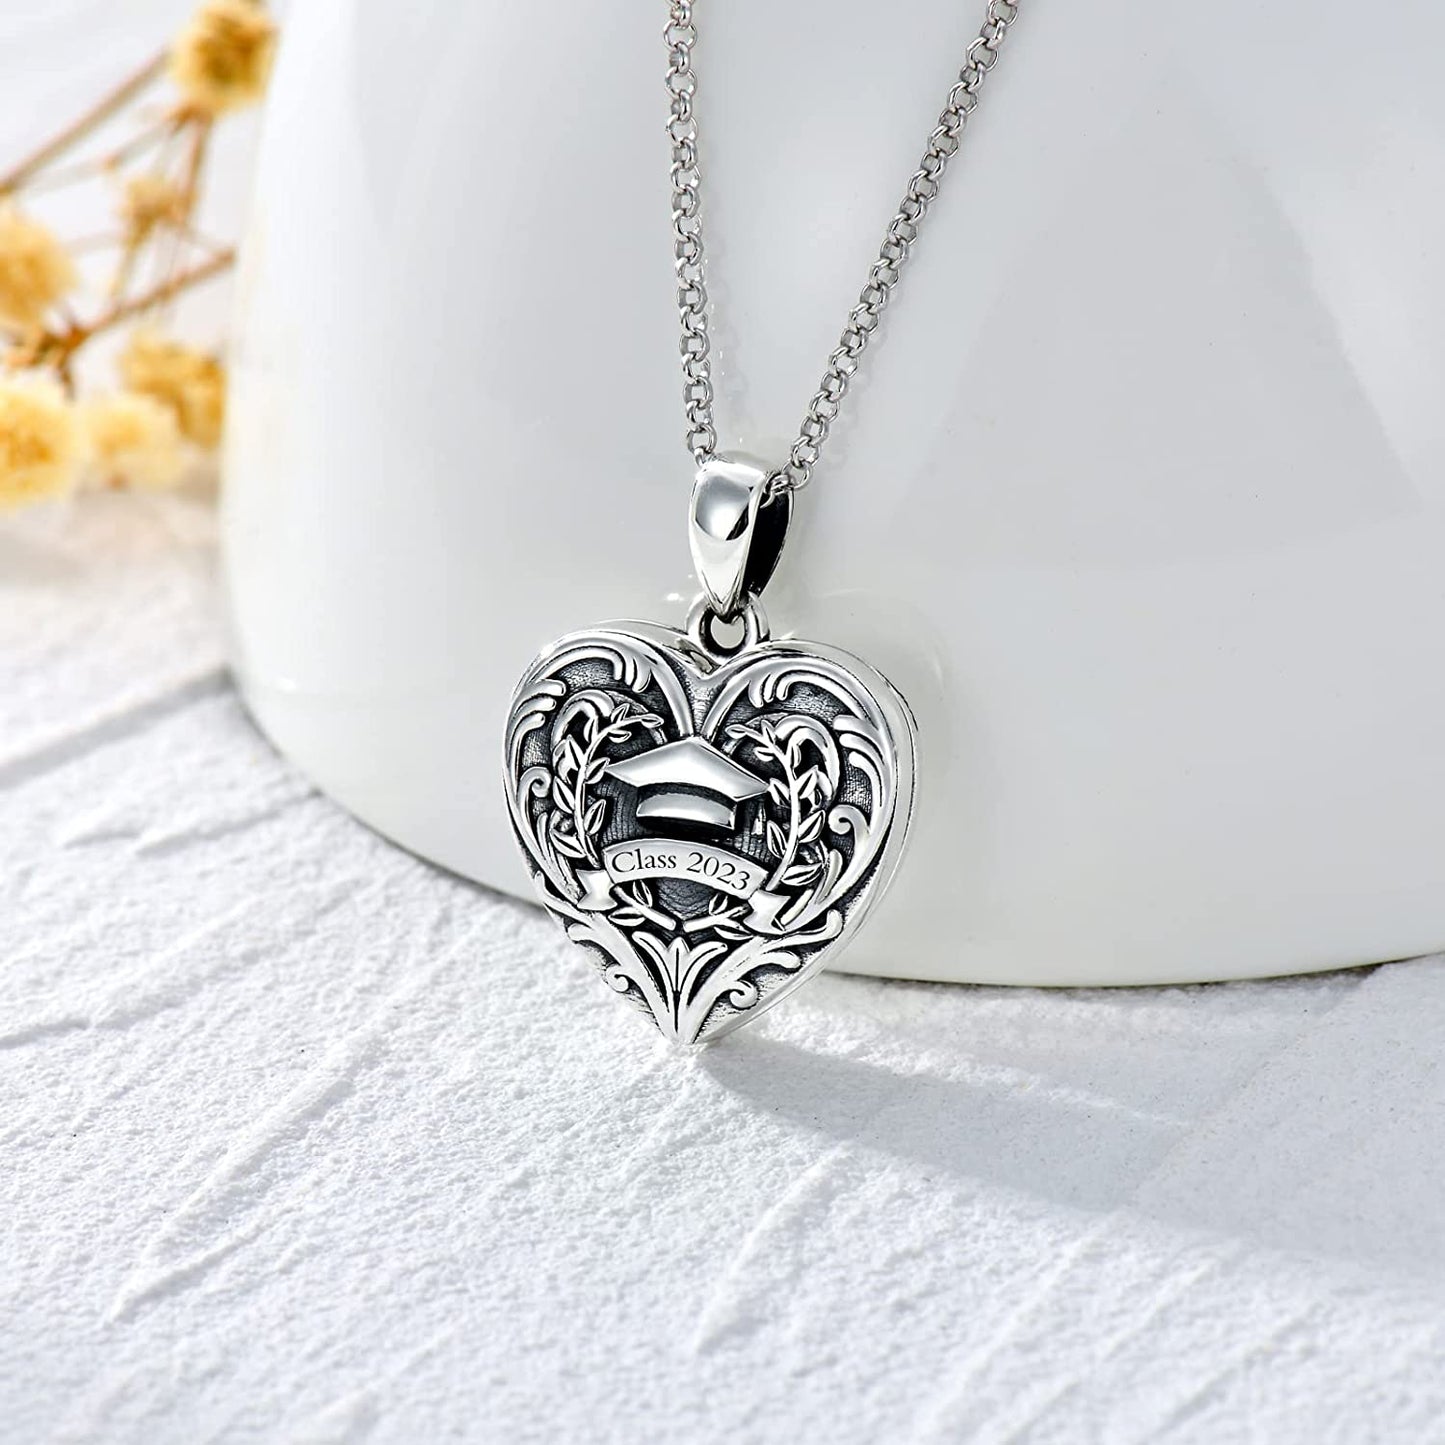 Graduation Gifts for Her, Class of 2023 Compass/Nursing Locket Necklace That Holds 2 Pictures Photo Graduation Cap Heart Pendant for Congratulation